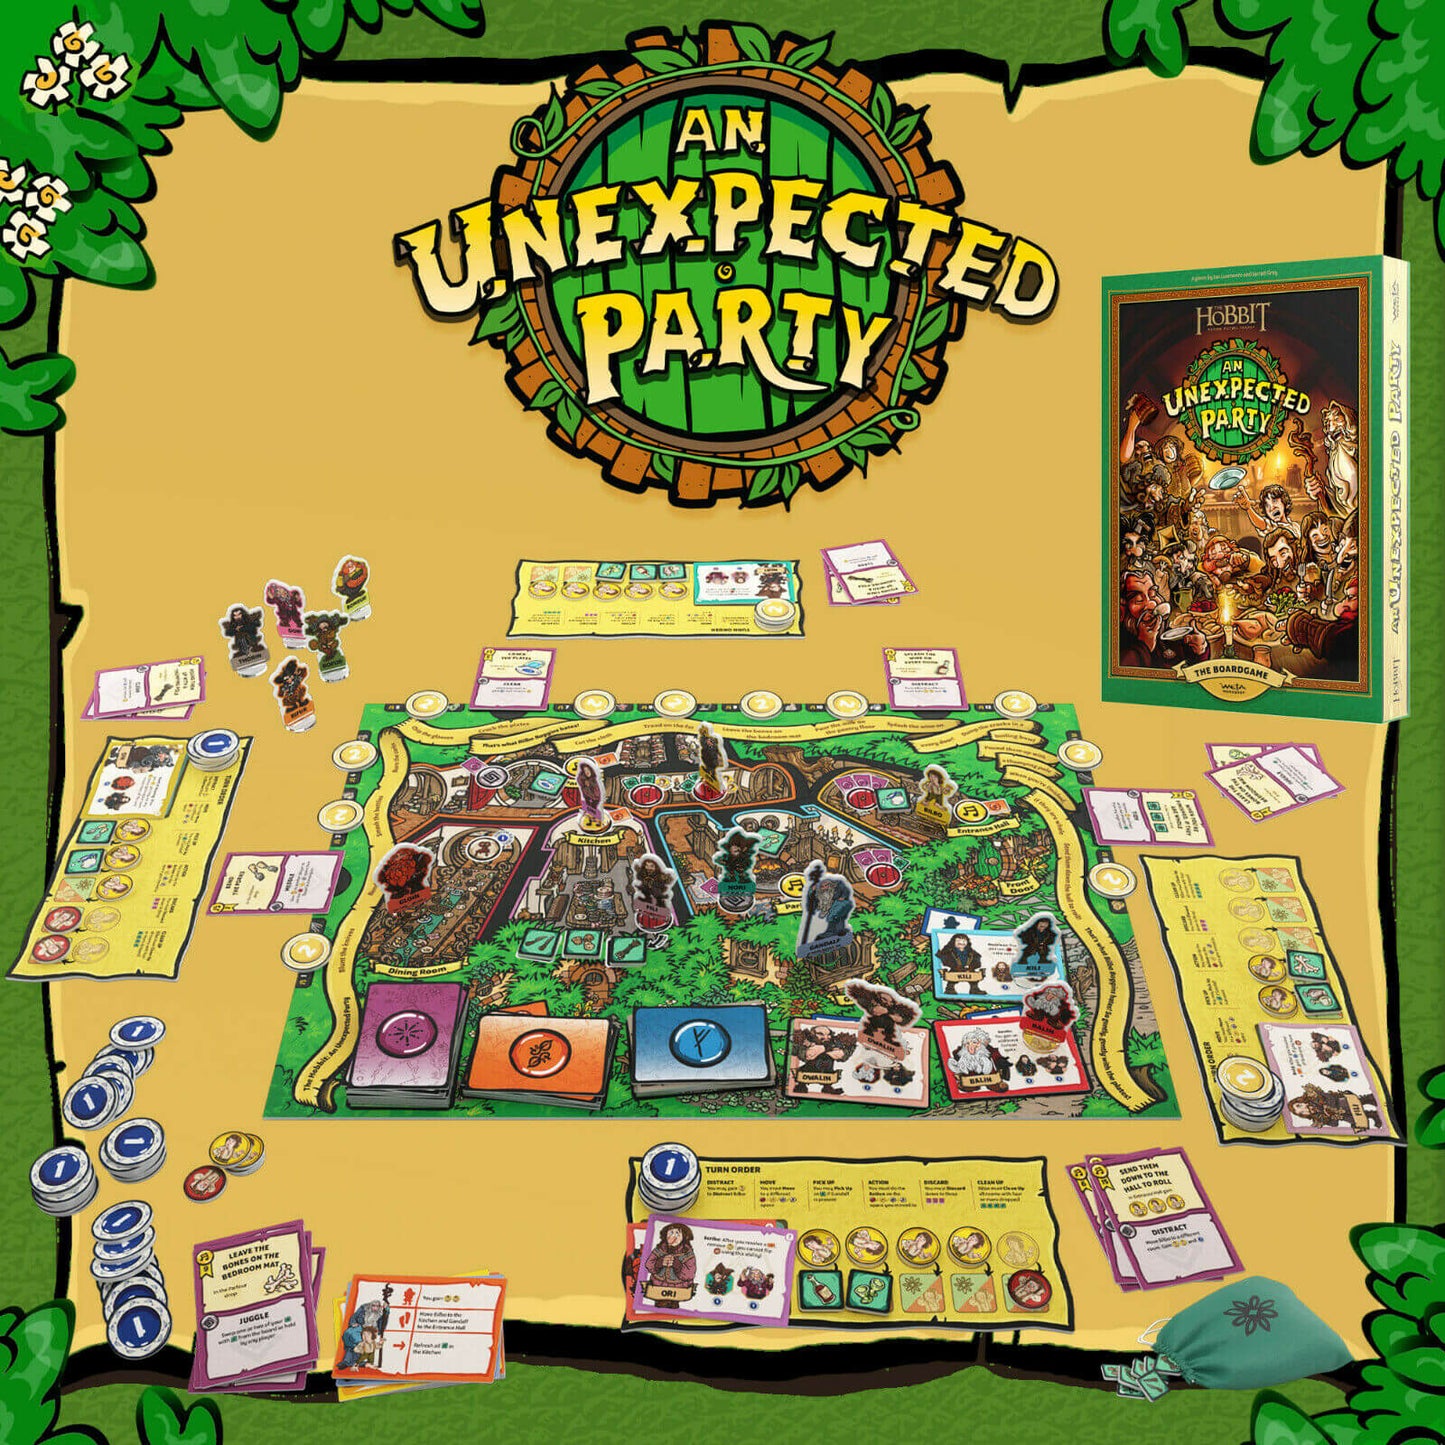 The Hobbit: An Unexpected Party Board Game